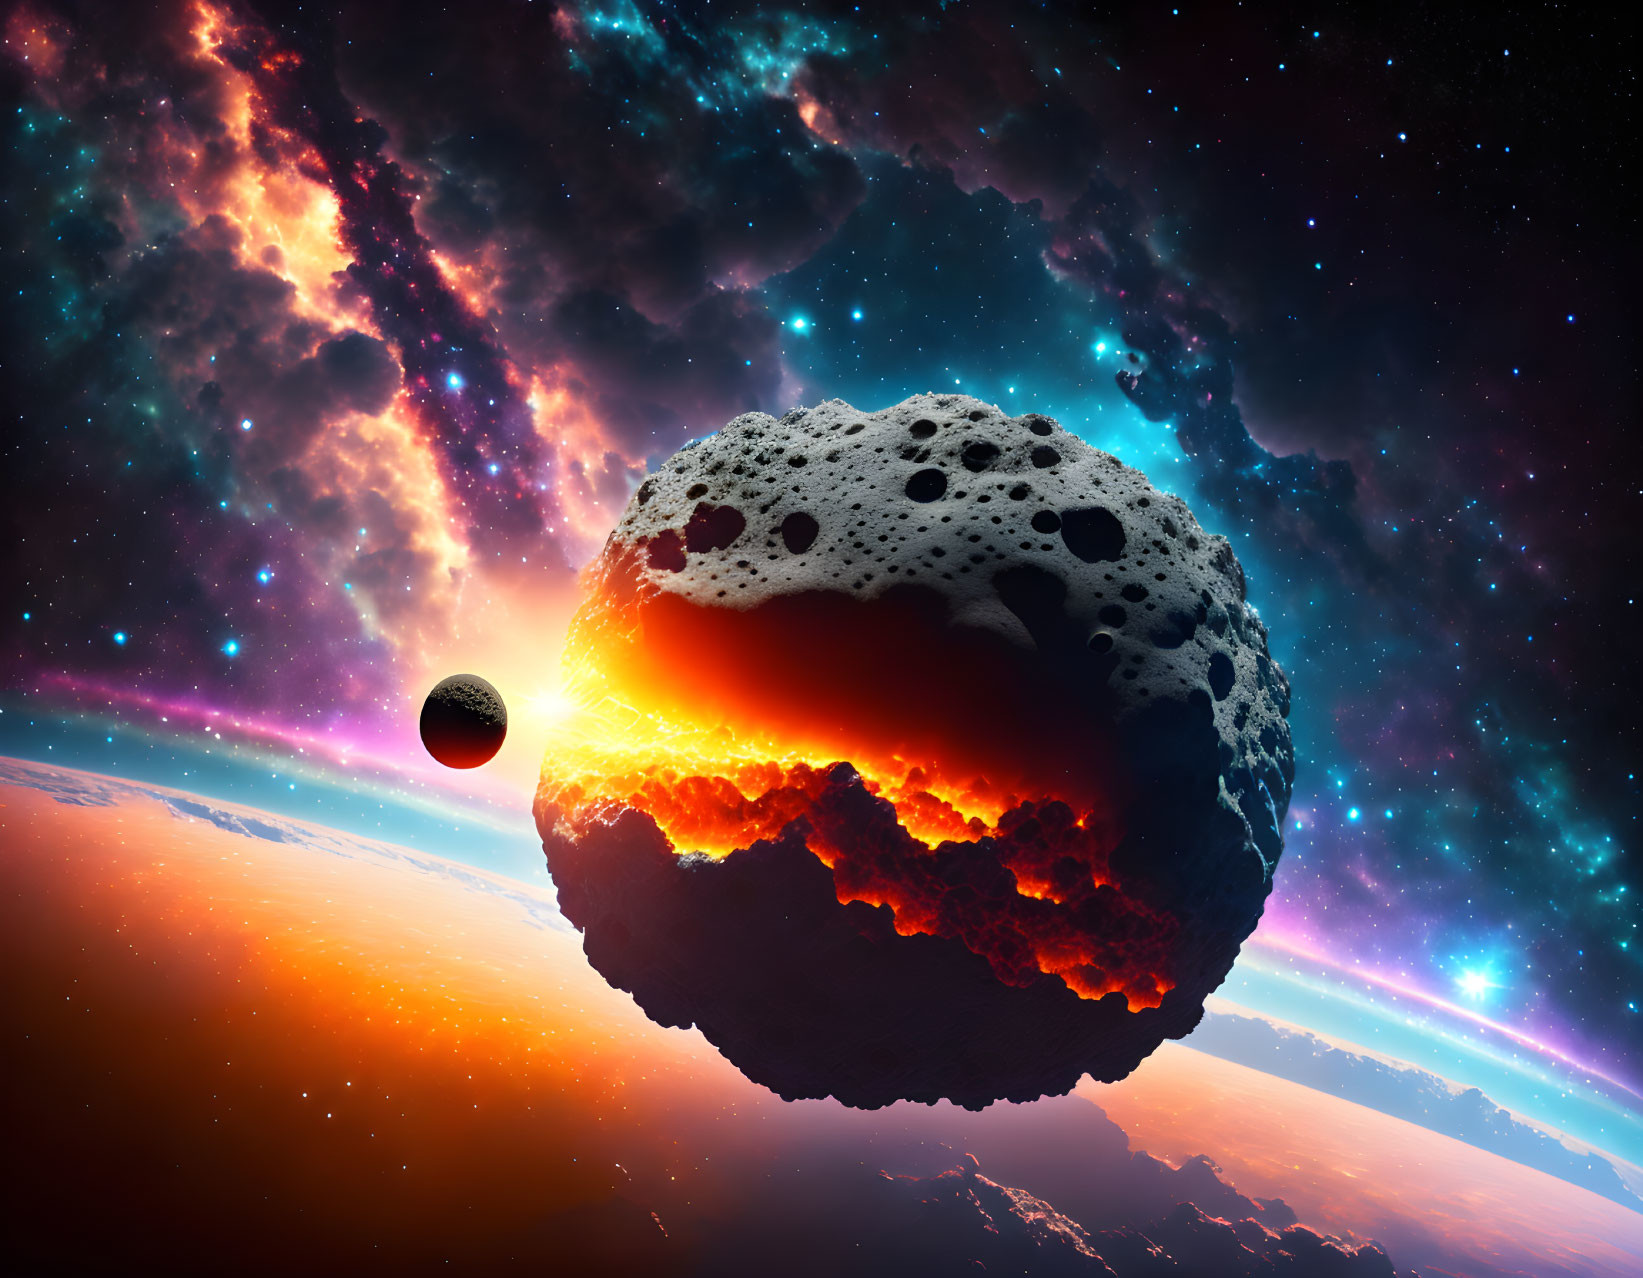 Glowing molten asteroid near planet with star-filled cosmic background